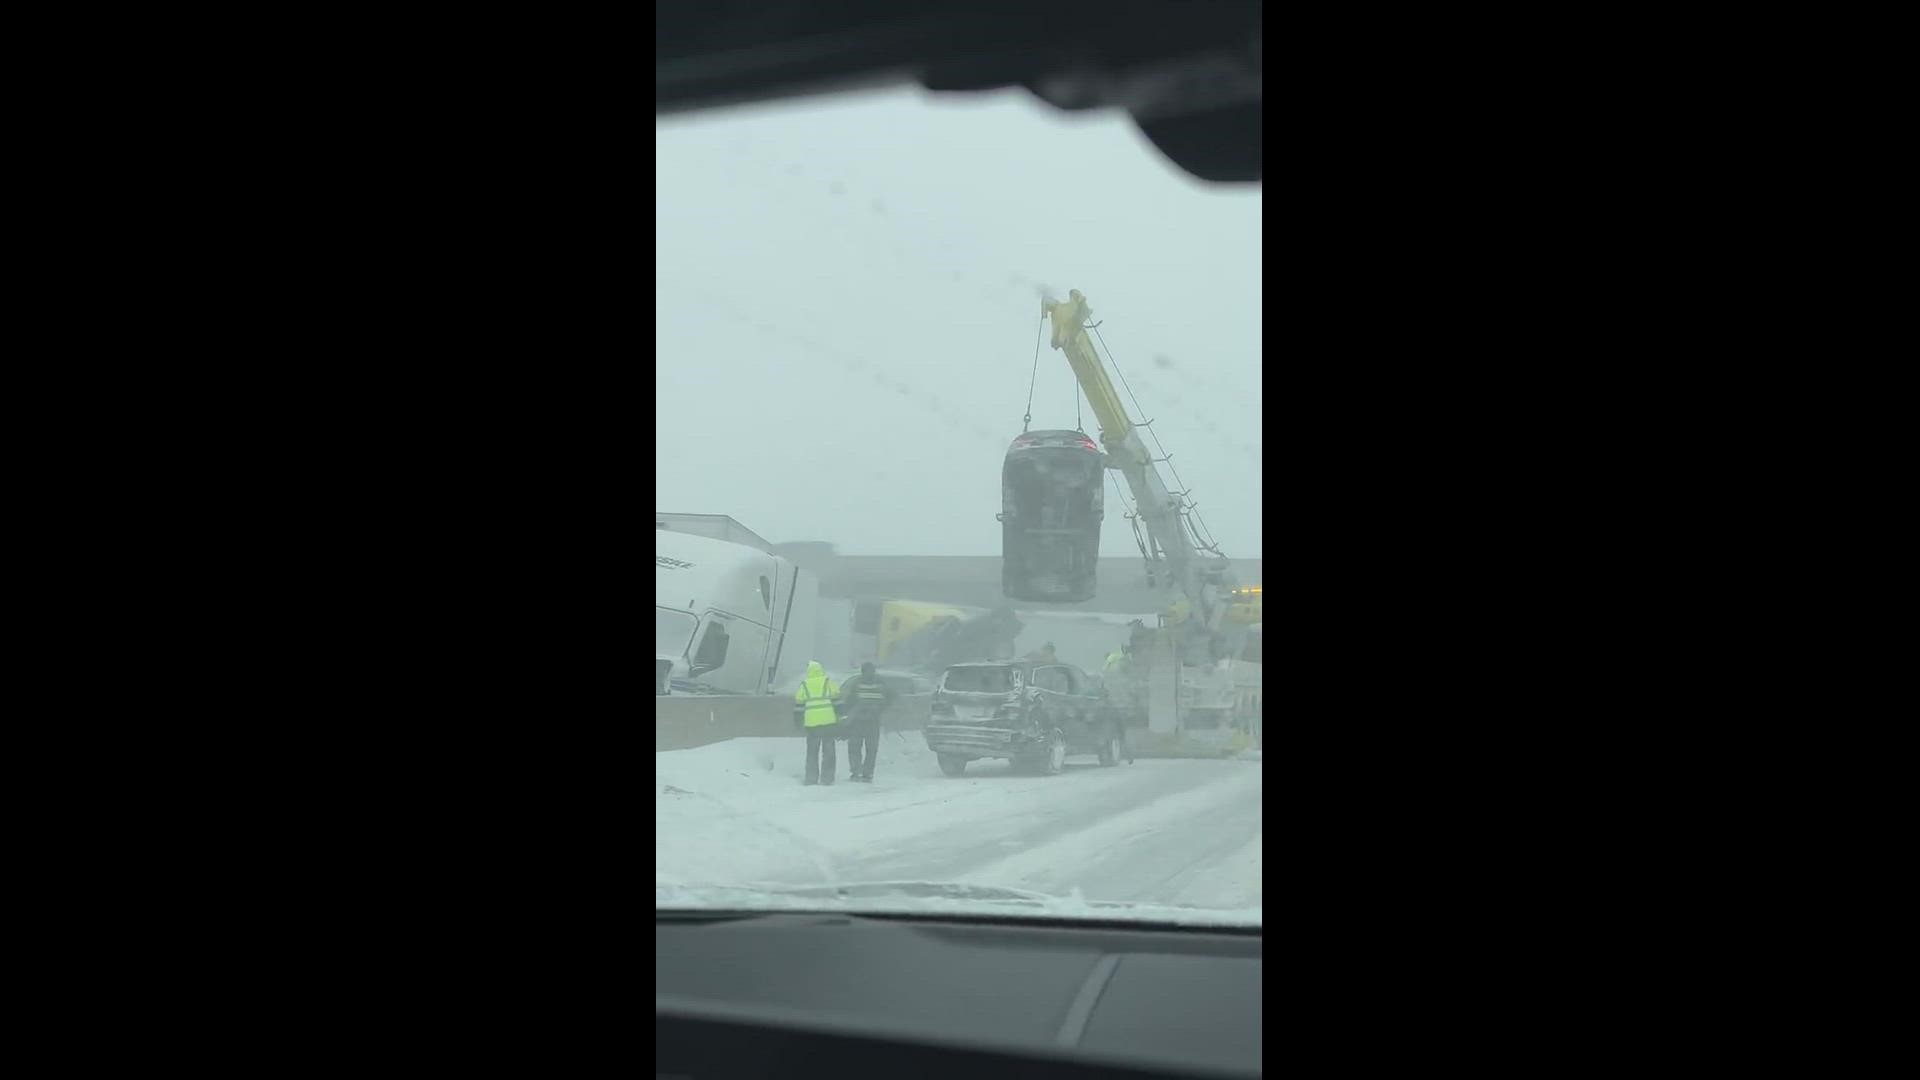 Multiple agencies are on scene of a string of major crashes that closed a portion of the Ohio Turnpike Friday afternoon. Credit: Mike Waldron